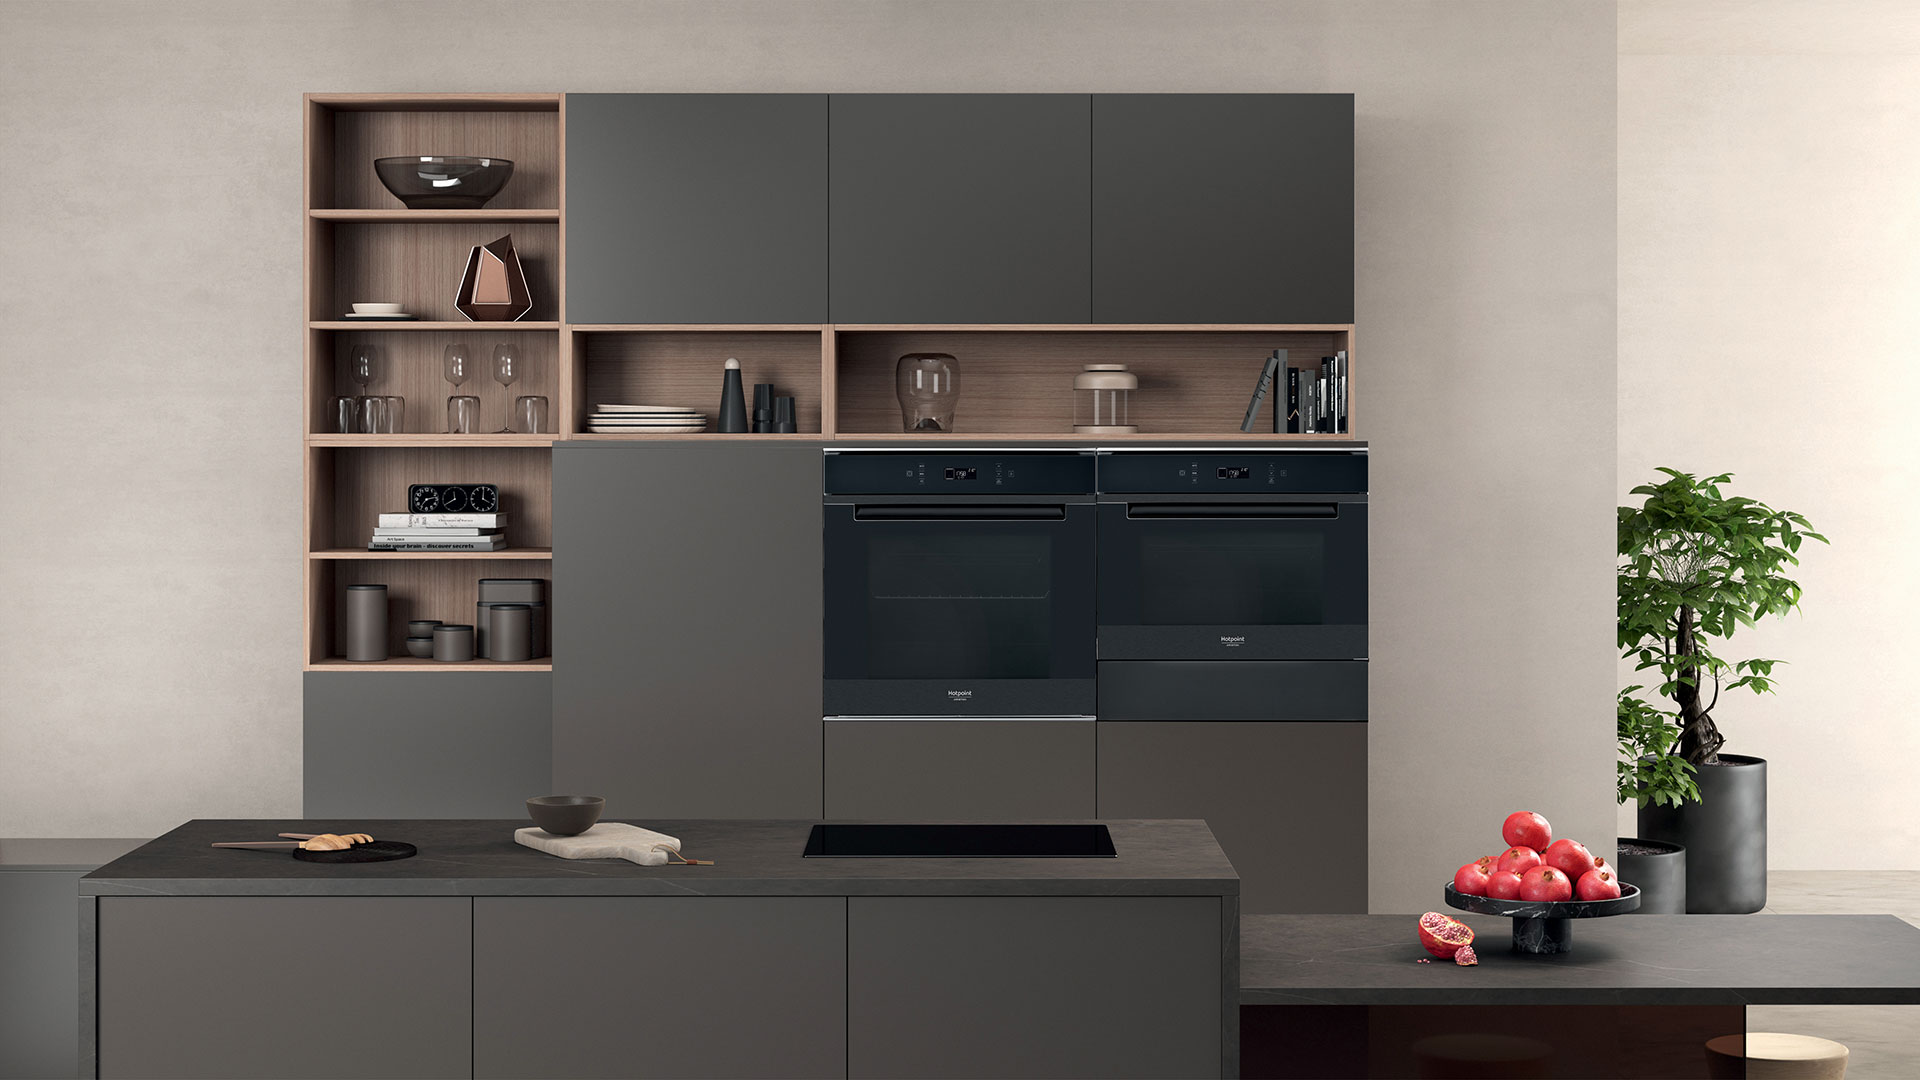 Style and personality in a kitchen with the new cookers and microwave ovens of the Black range by Hotpoint